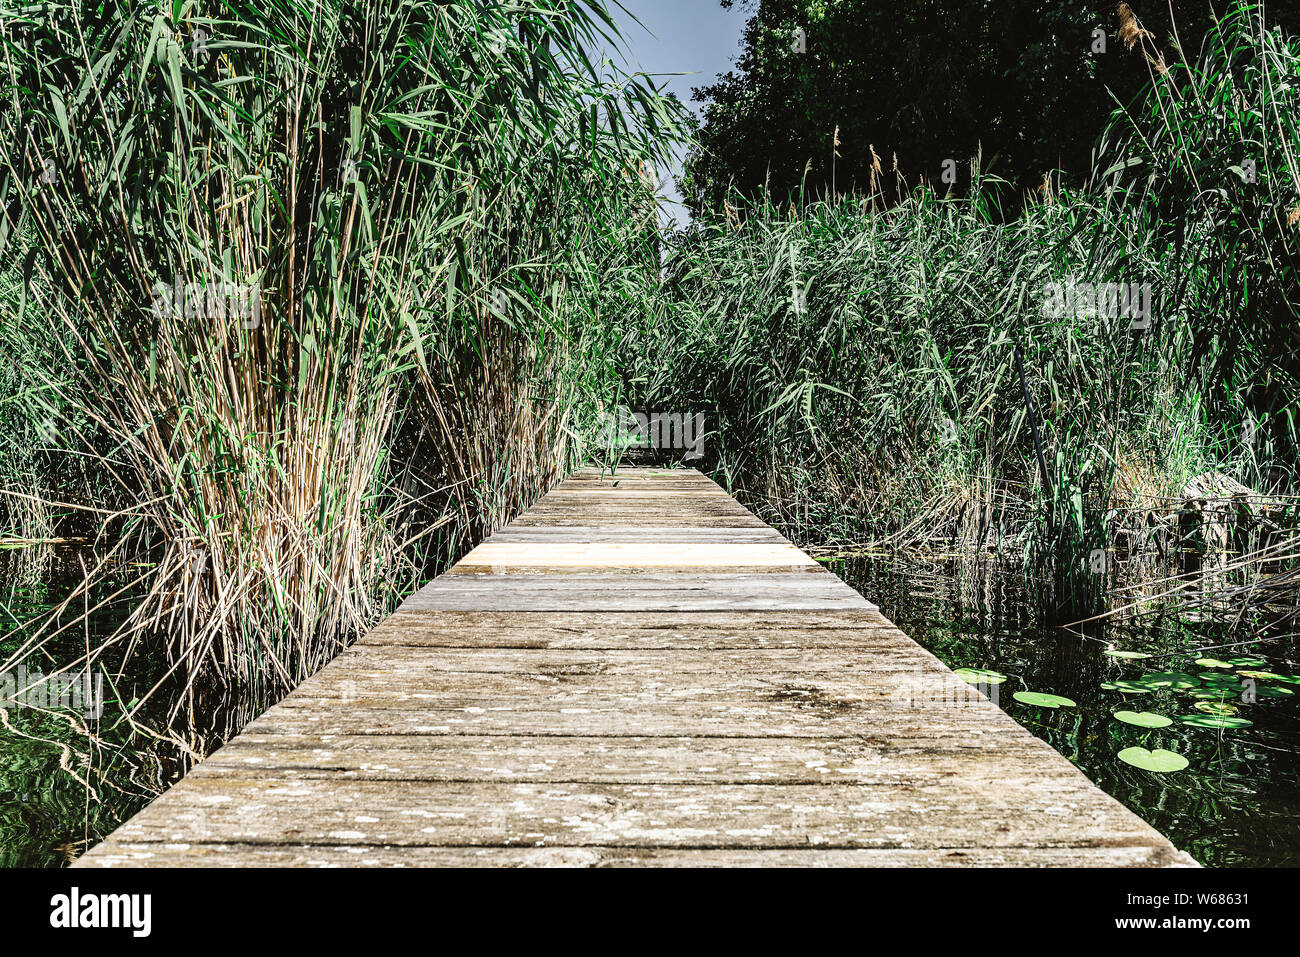 jetty or wooden dock on lake surrounded by reeds on sunny day Stock Photo